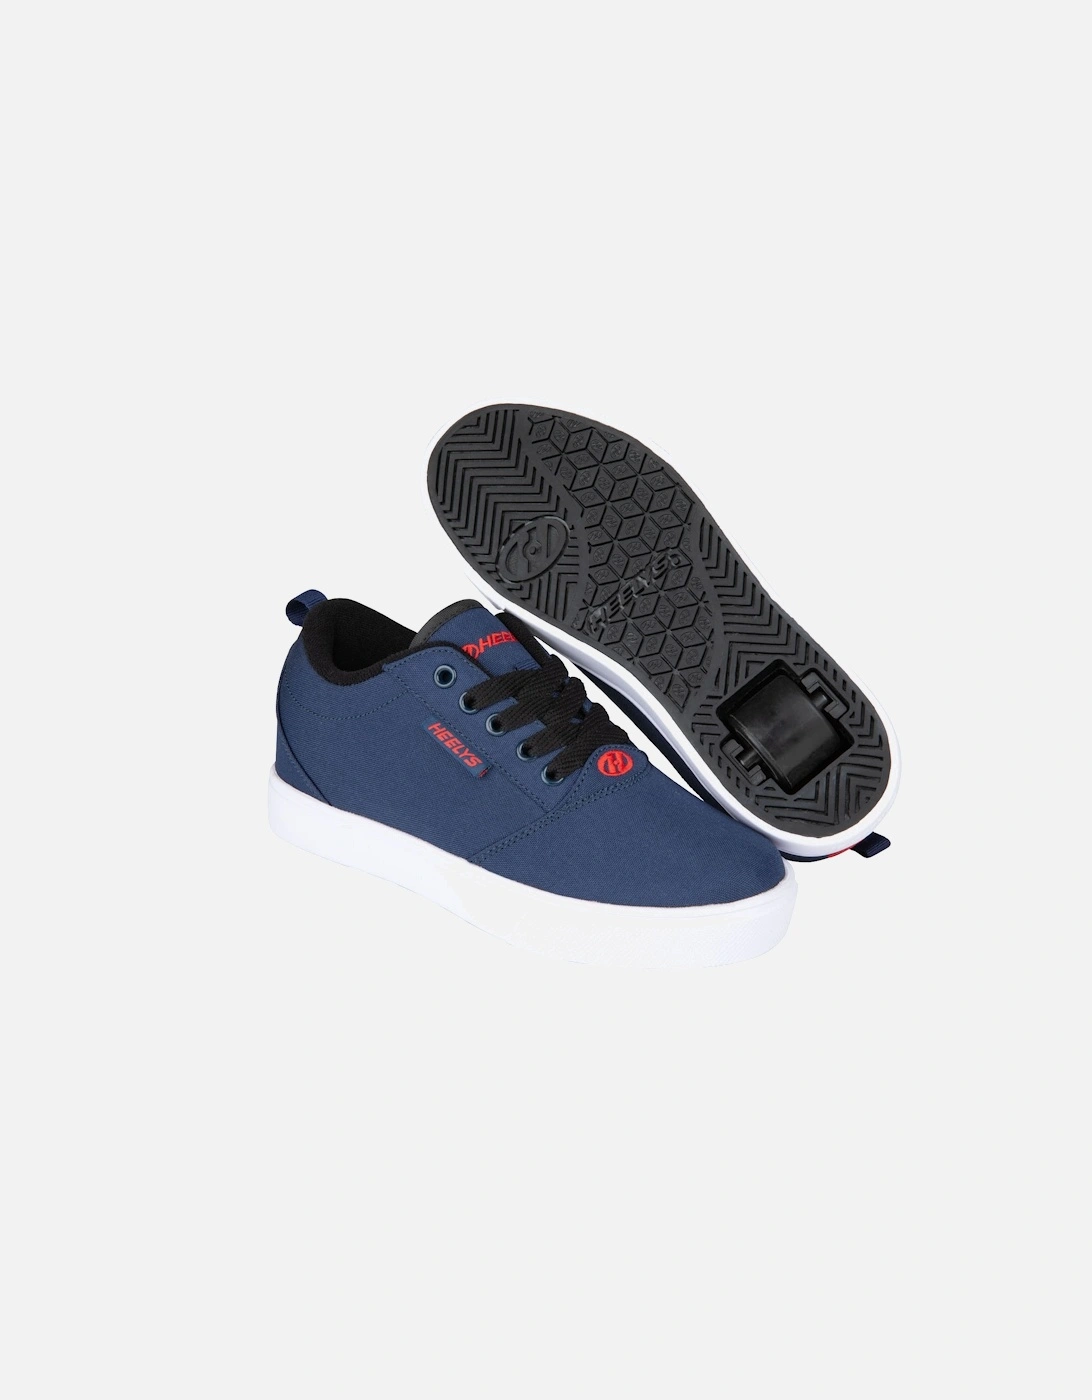 Boys Trainers Pro 20 Canvas Lace Up Skate Shoes Wheels Navy UK Size